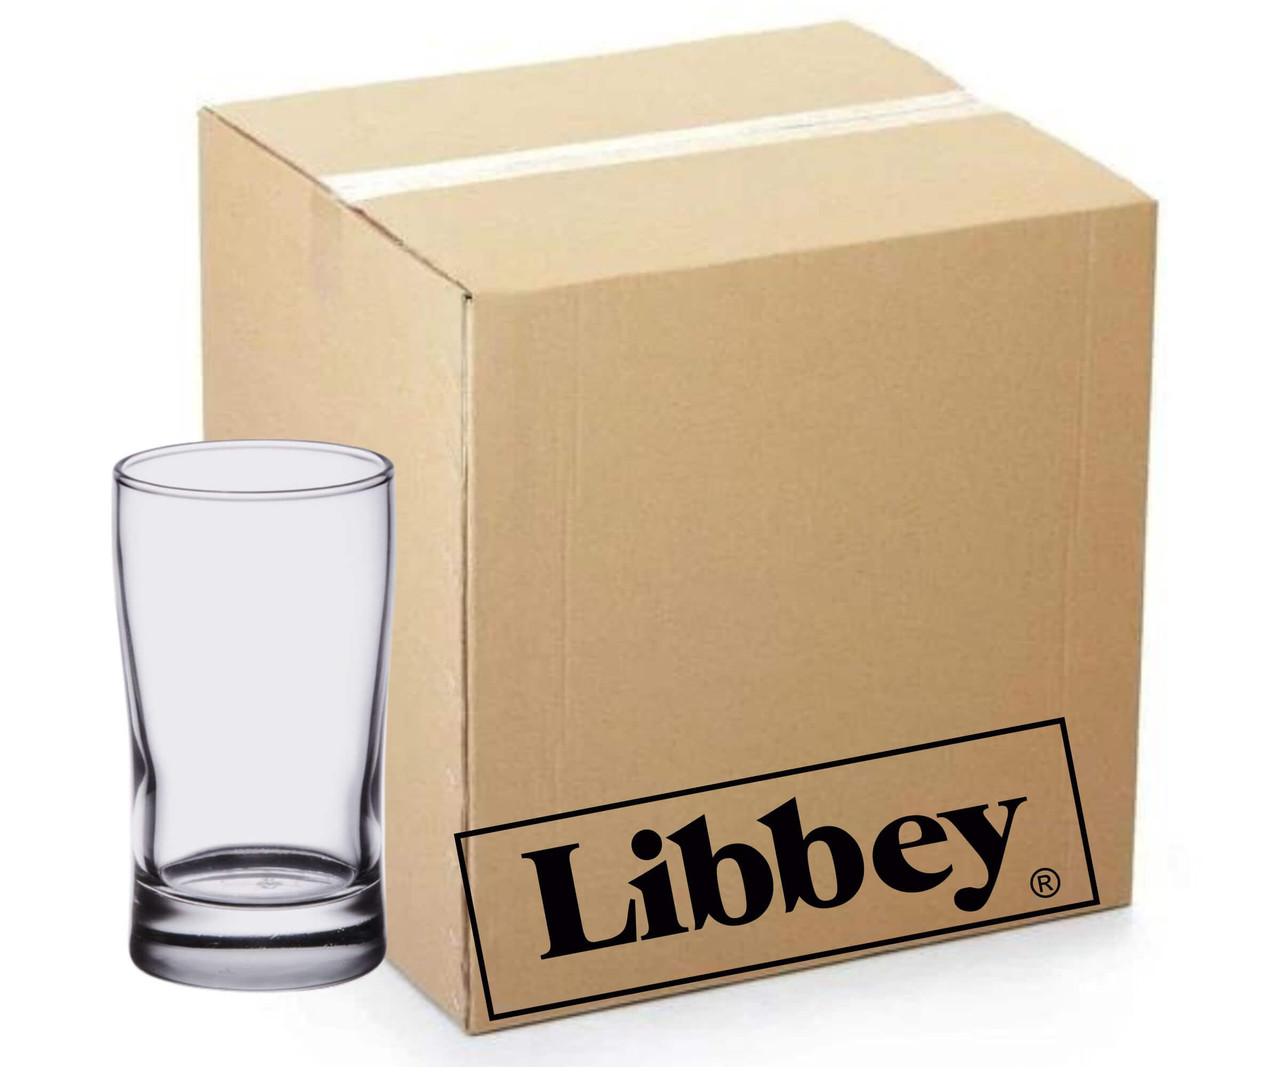 Libbey Case of 72 Esquire 5 oz. Side Water/Tasting Glasses-Chicken Pieces